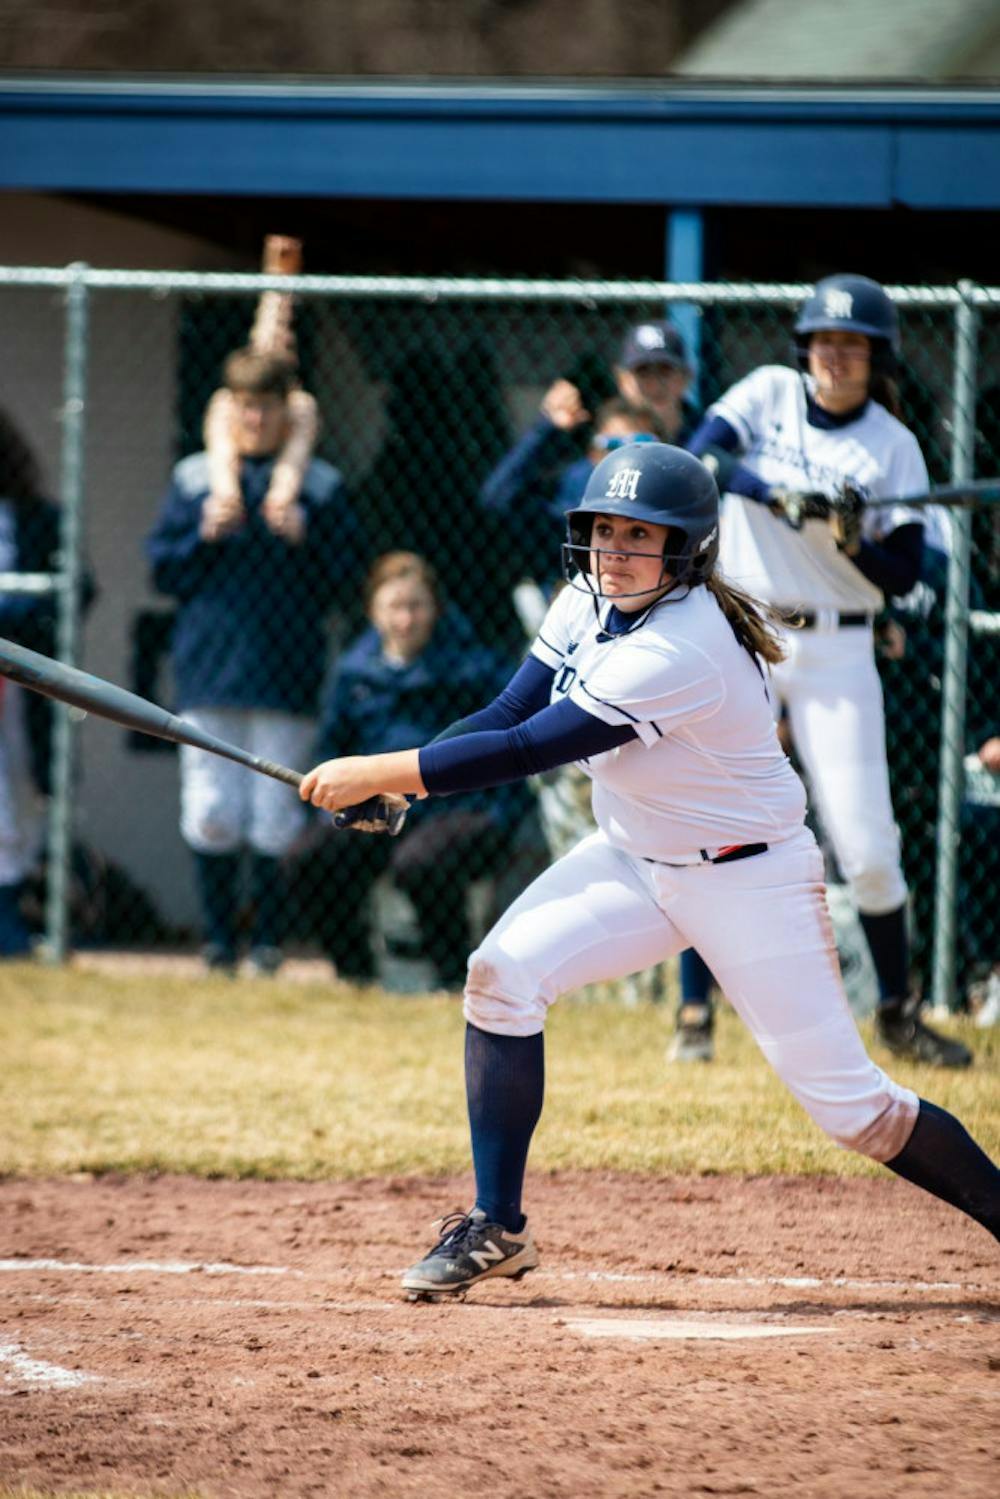 <span class="photocreditinline"><a href="https://middleburycampus.com/39670/uncategorized/michael-borenstein/">MICHAEL BORENSTEIN</a></span><br />Emily Moore ’21 has earned 32 runs and 35 hits in her career.